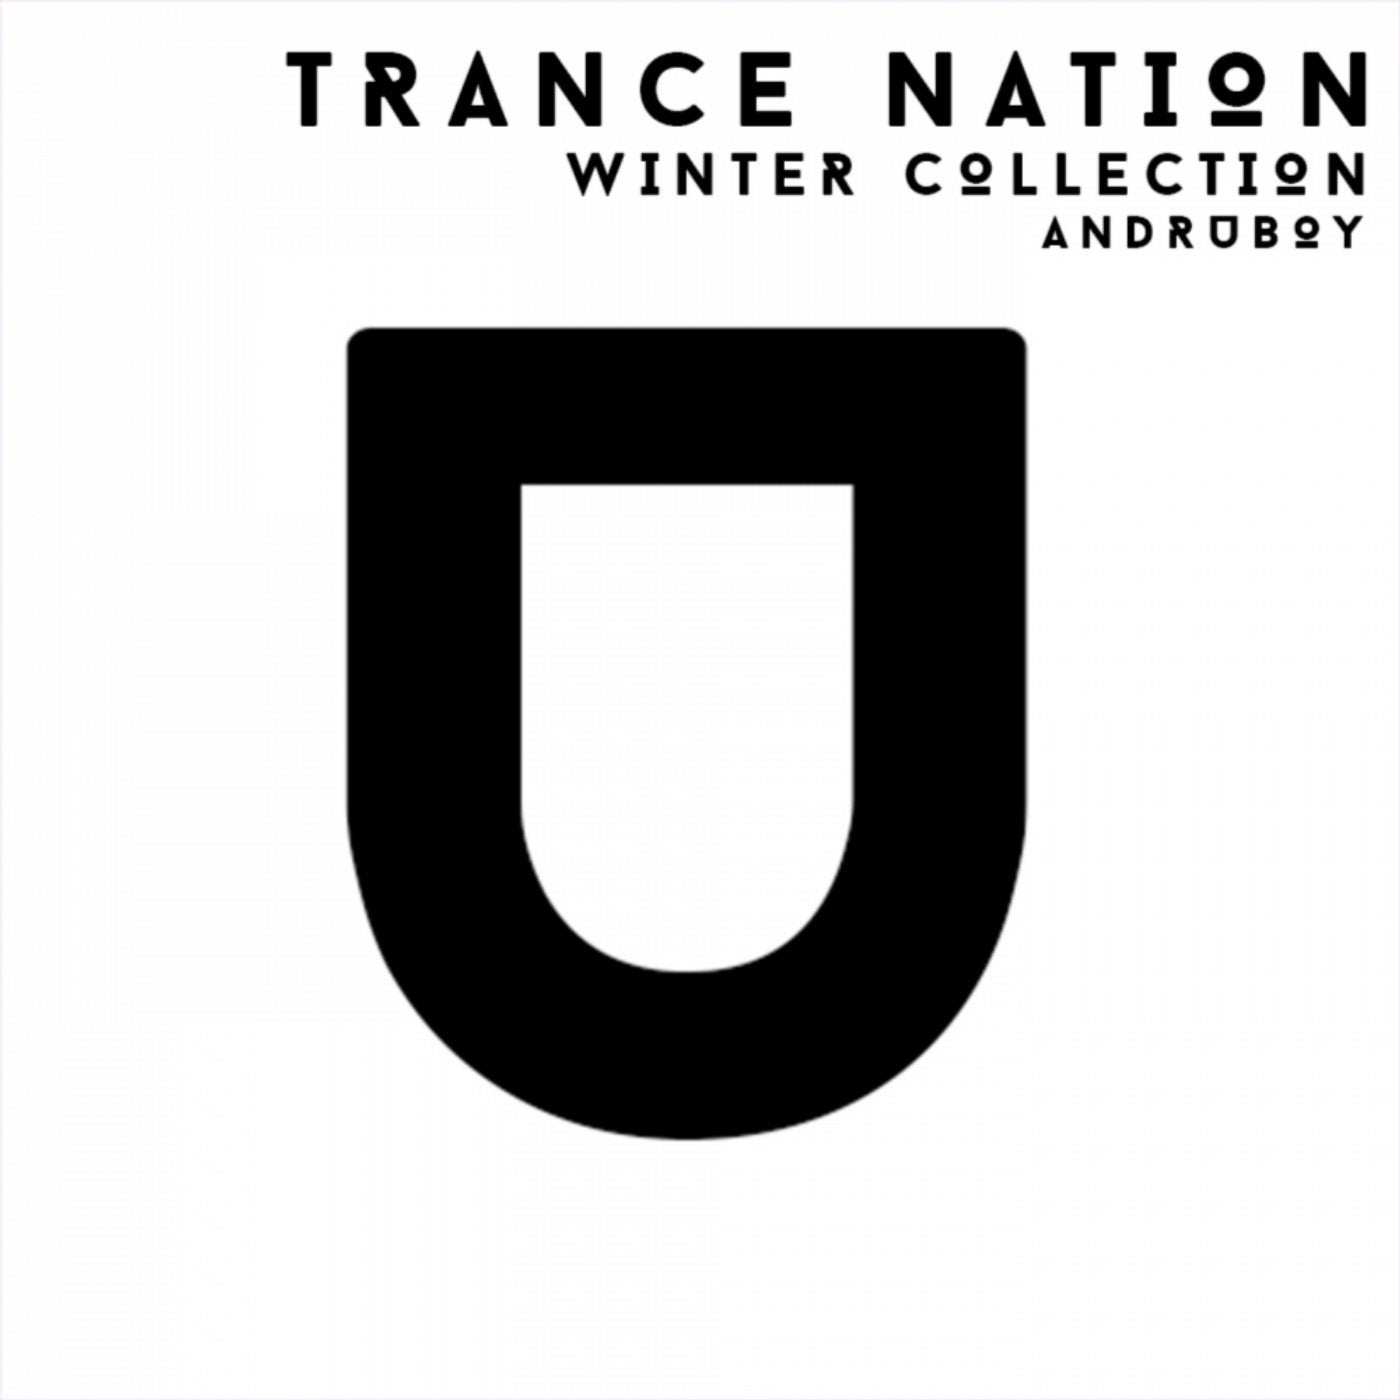 Trance Nation. Winter Collection. Andruboy.